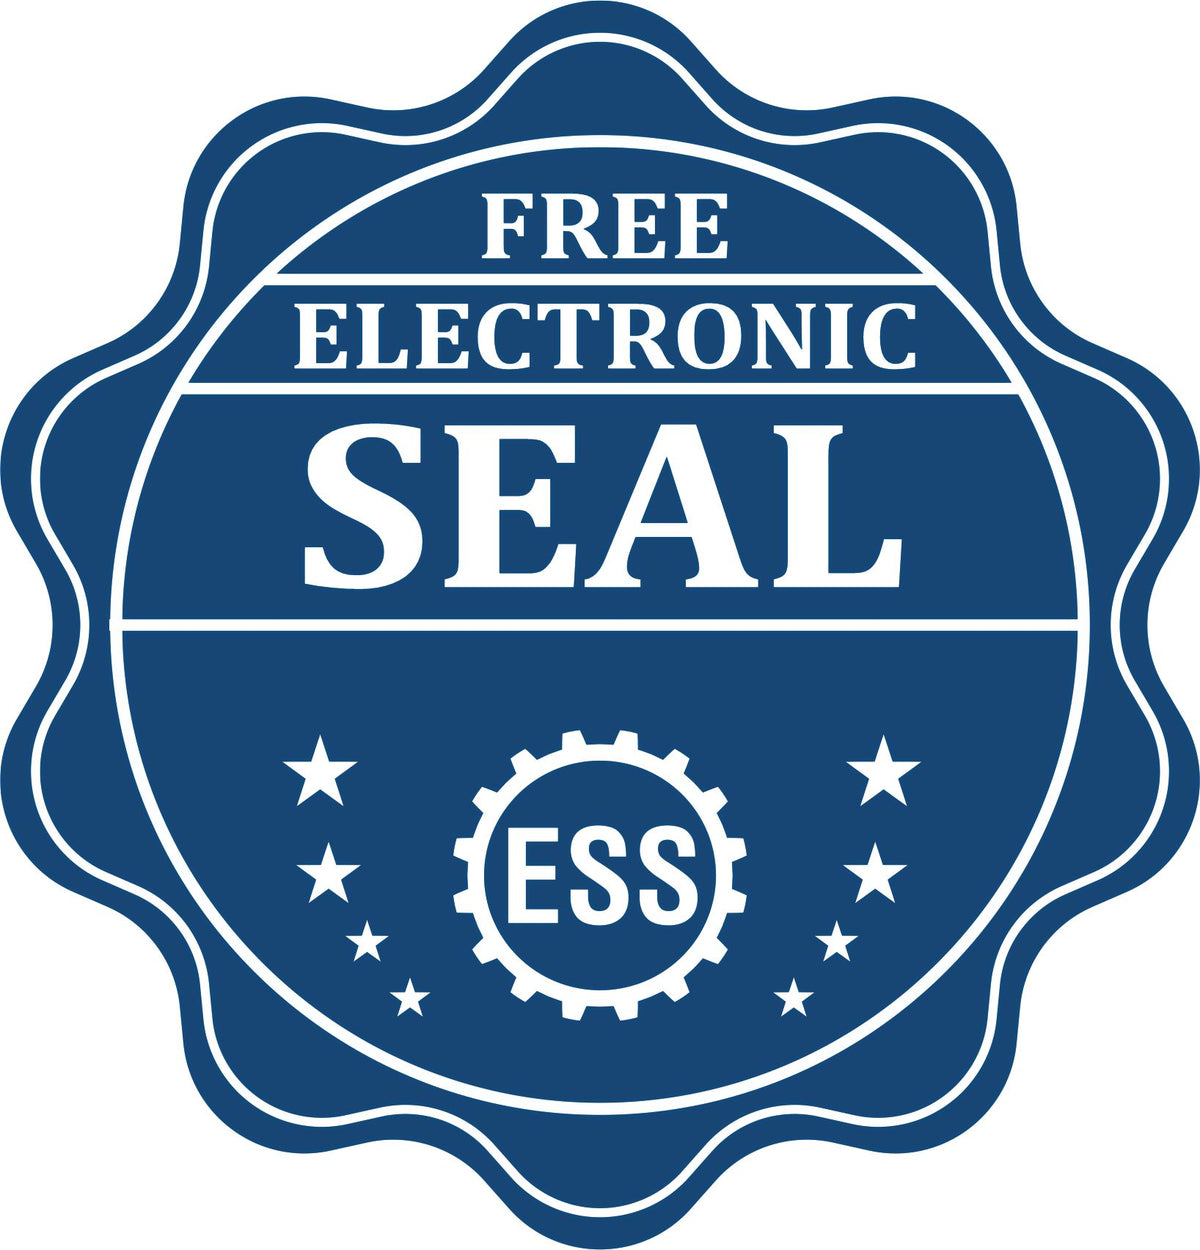 A badge showing a free electronic seal for the State of Minnesota Soft Land Surveyor Embossing Seal with stars and the ESS gear on the emblem.